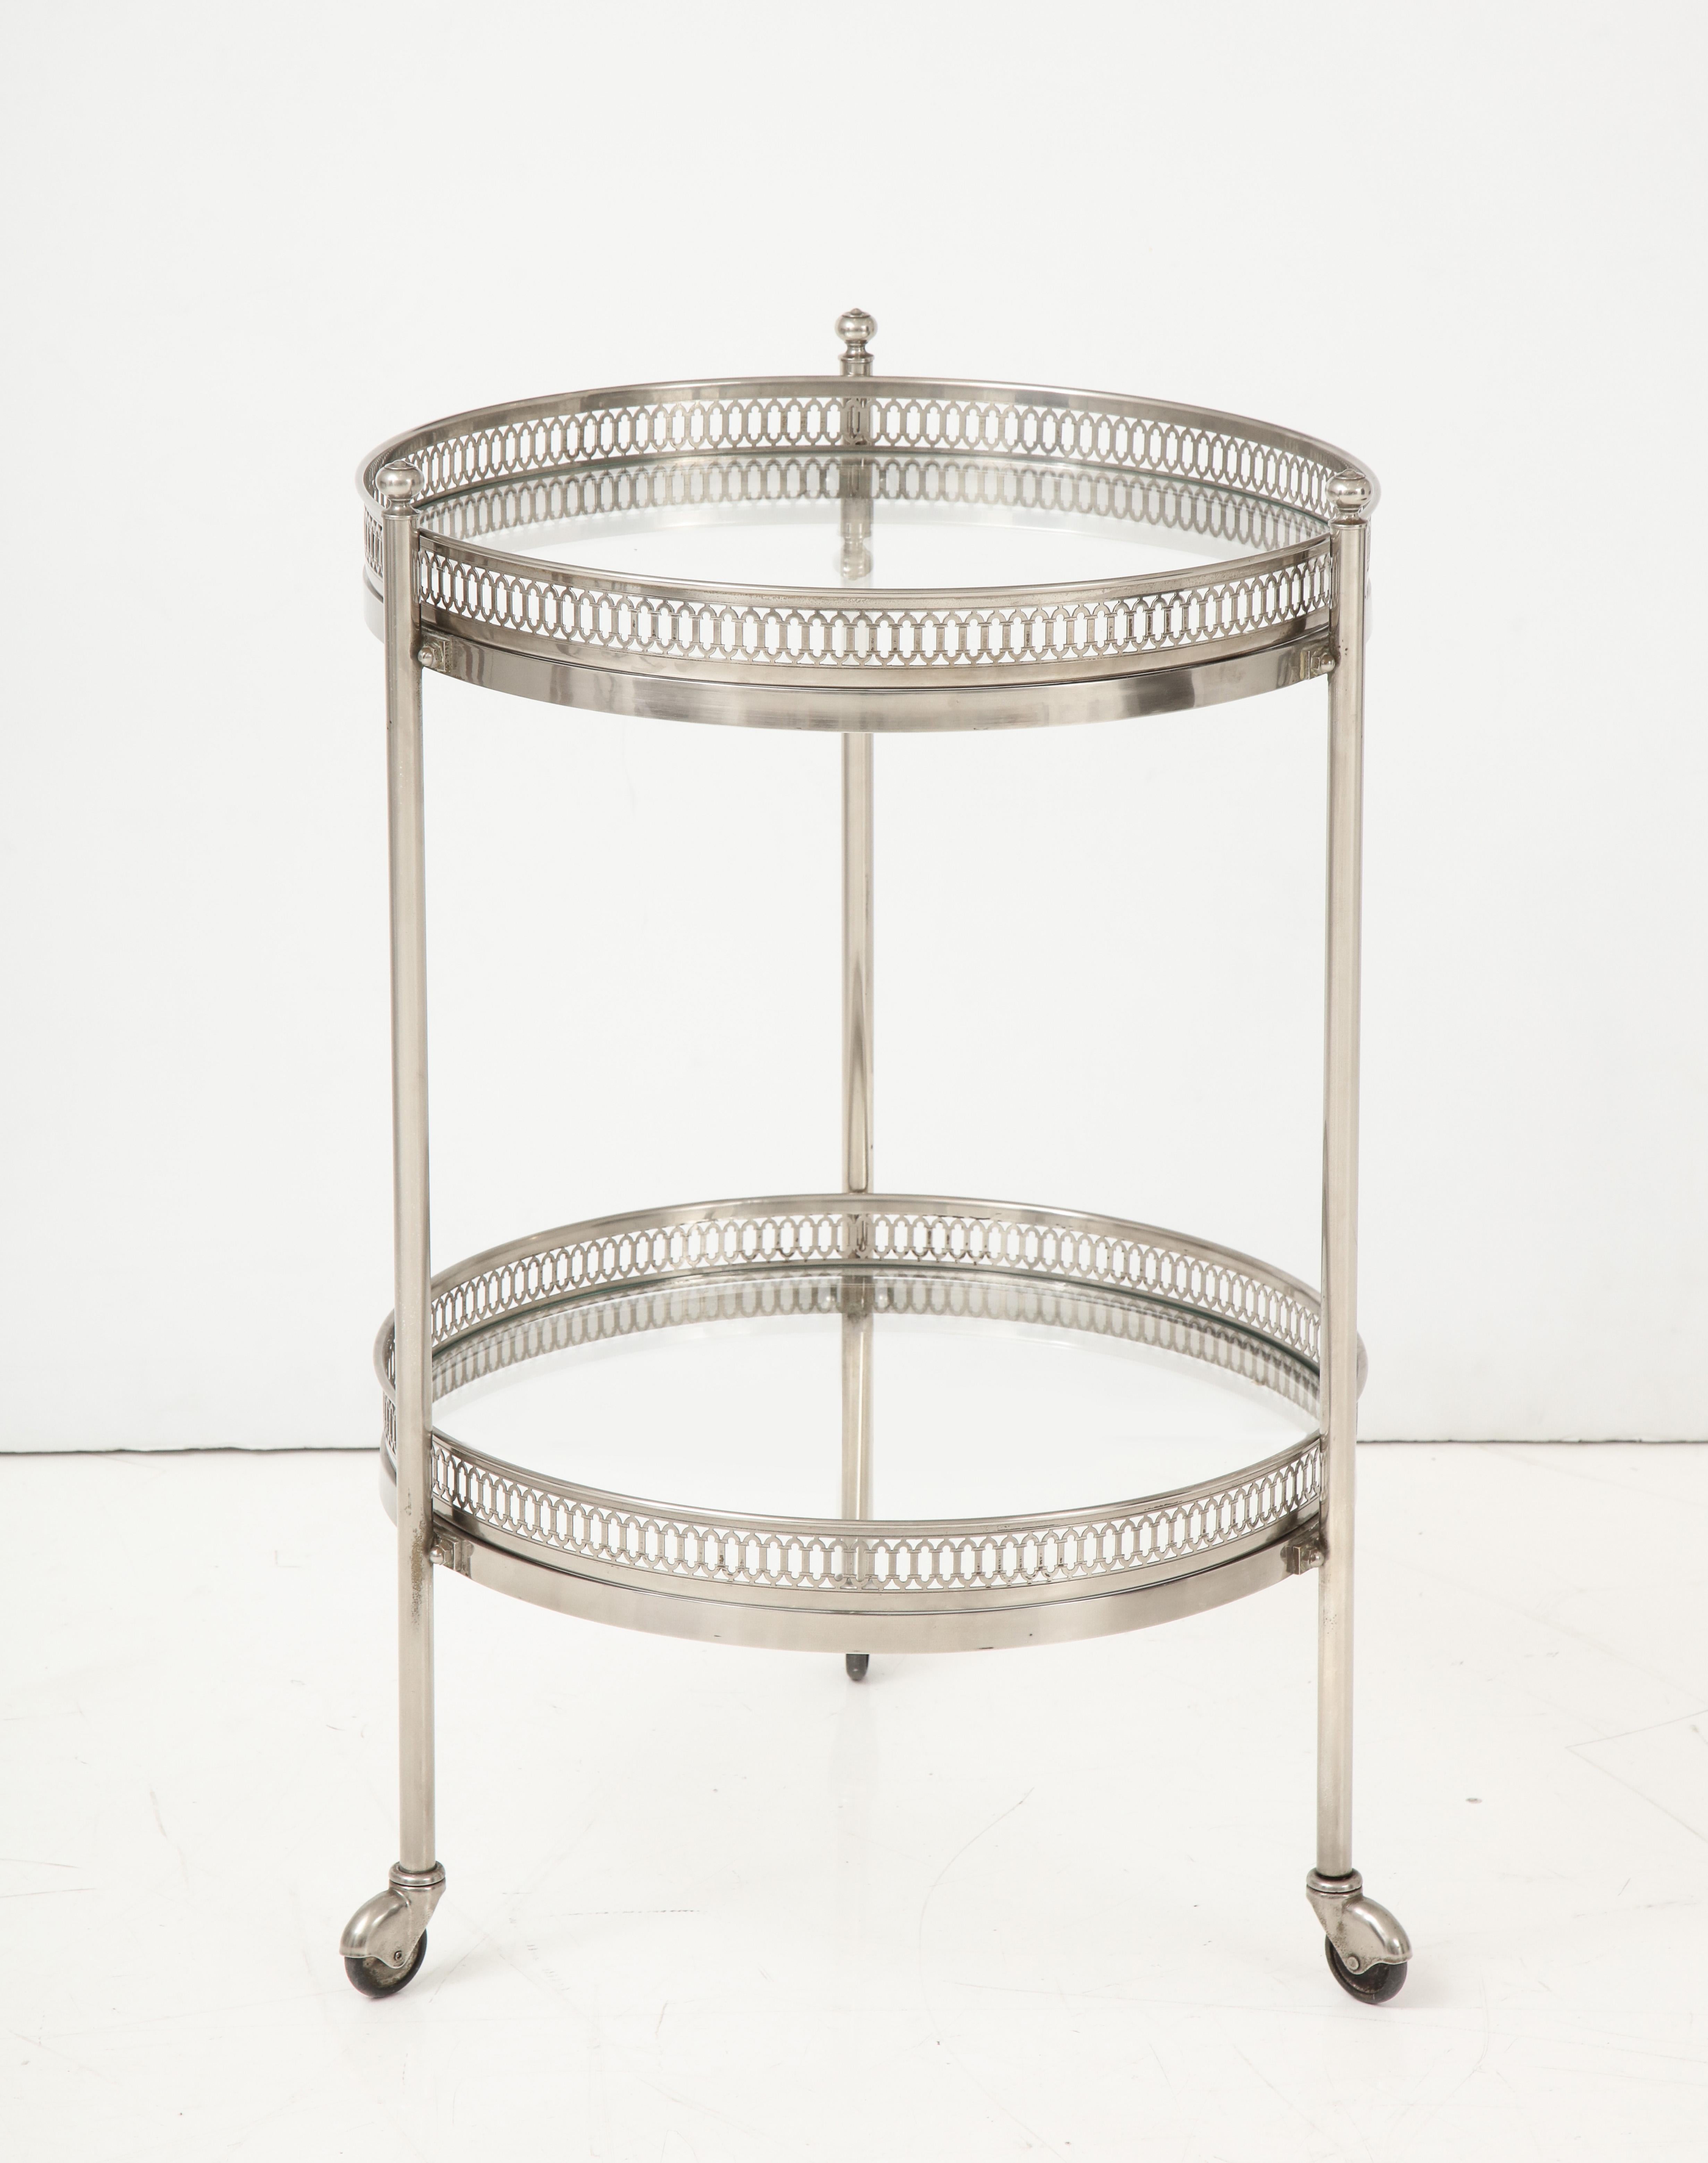 Who doesn't love a bar cart? We chose this one for its round shape and design. Finished in polished nickel, this little gem features two levels, each surrounded by a detailed gallery, and three legs on castors. Perfect for a small space!